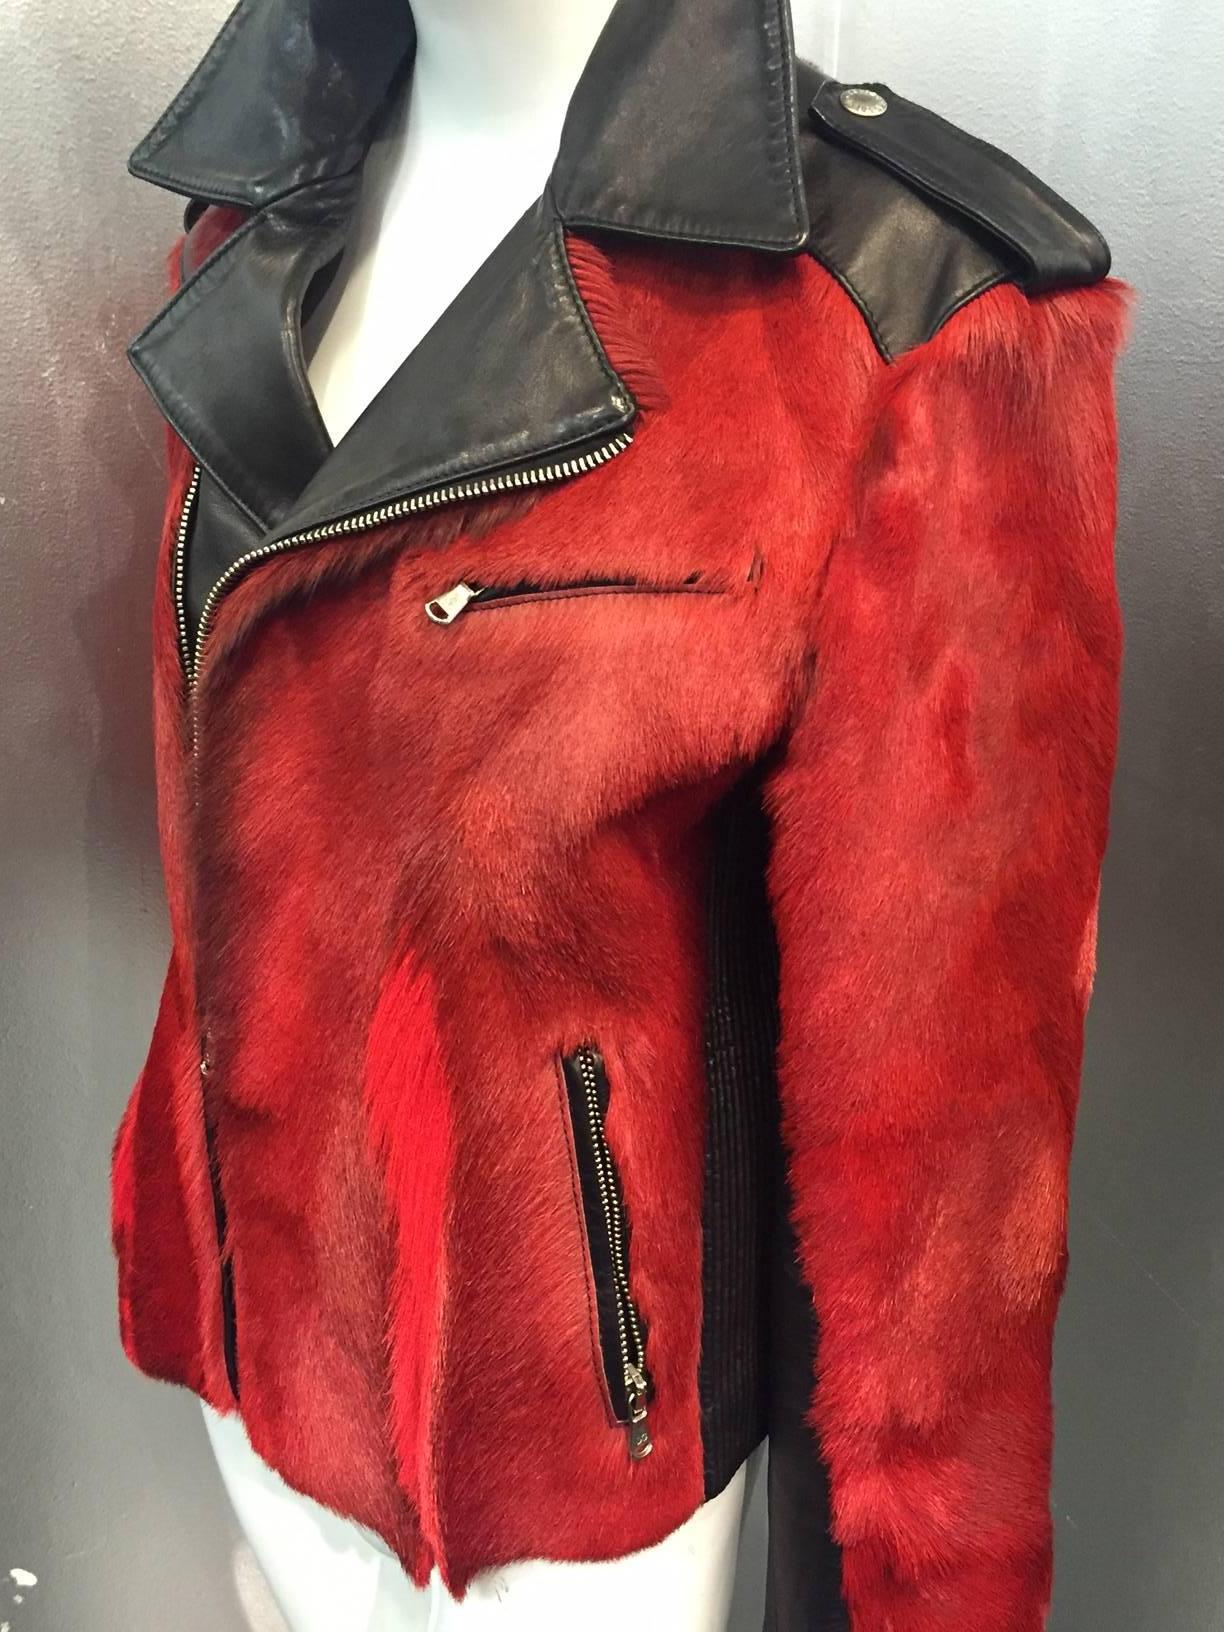 dolce gabbana red leather jacket